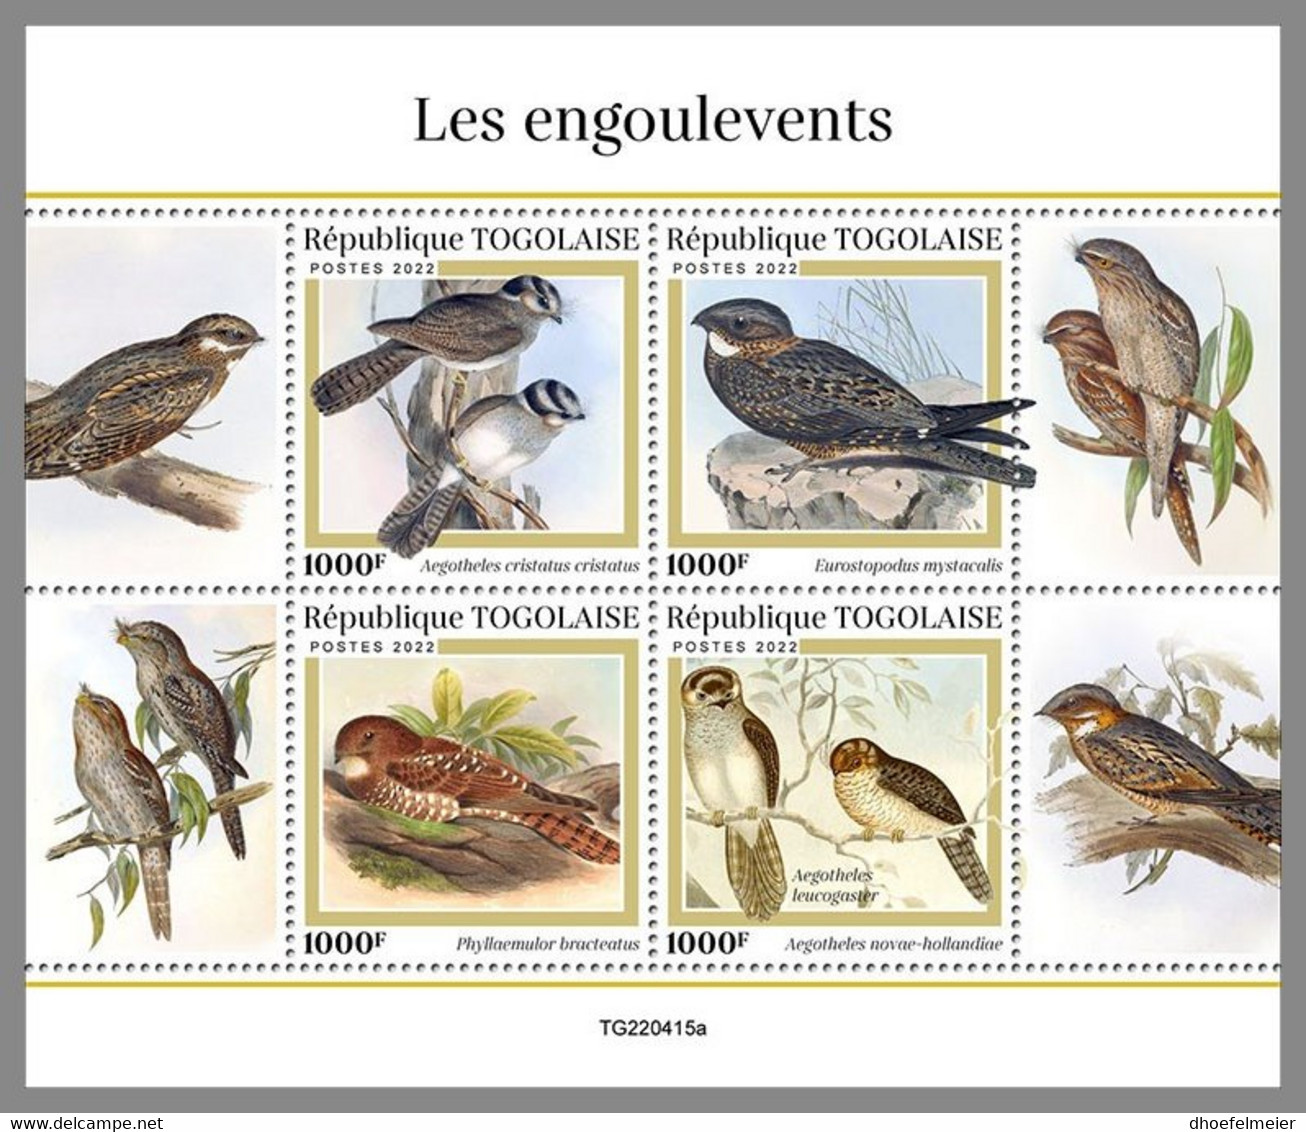 TOGO 2022 MNH Nightjars Nachtschwalben Engoulevents M/S - OFFICIAL ISSUE - DHQ2310 - Rondini